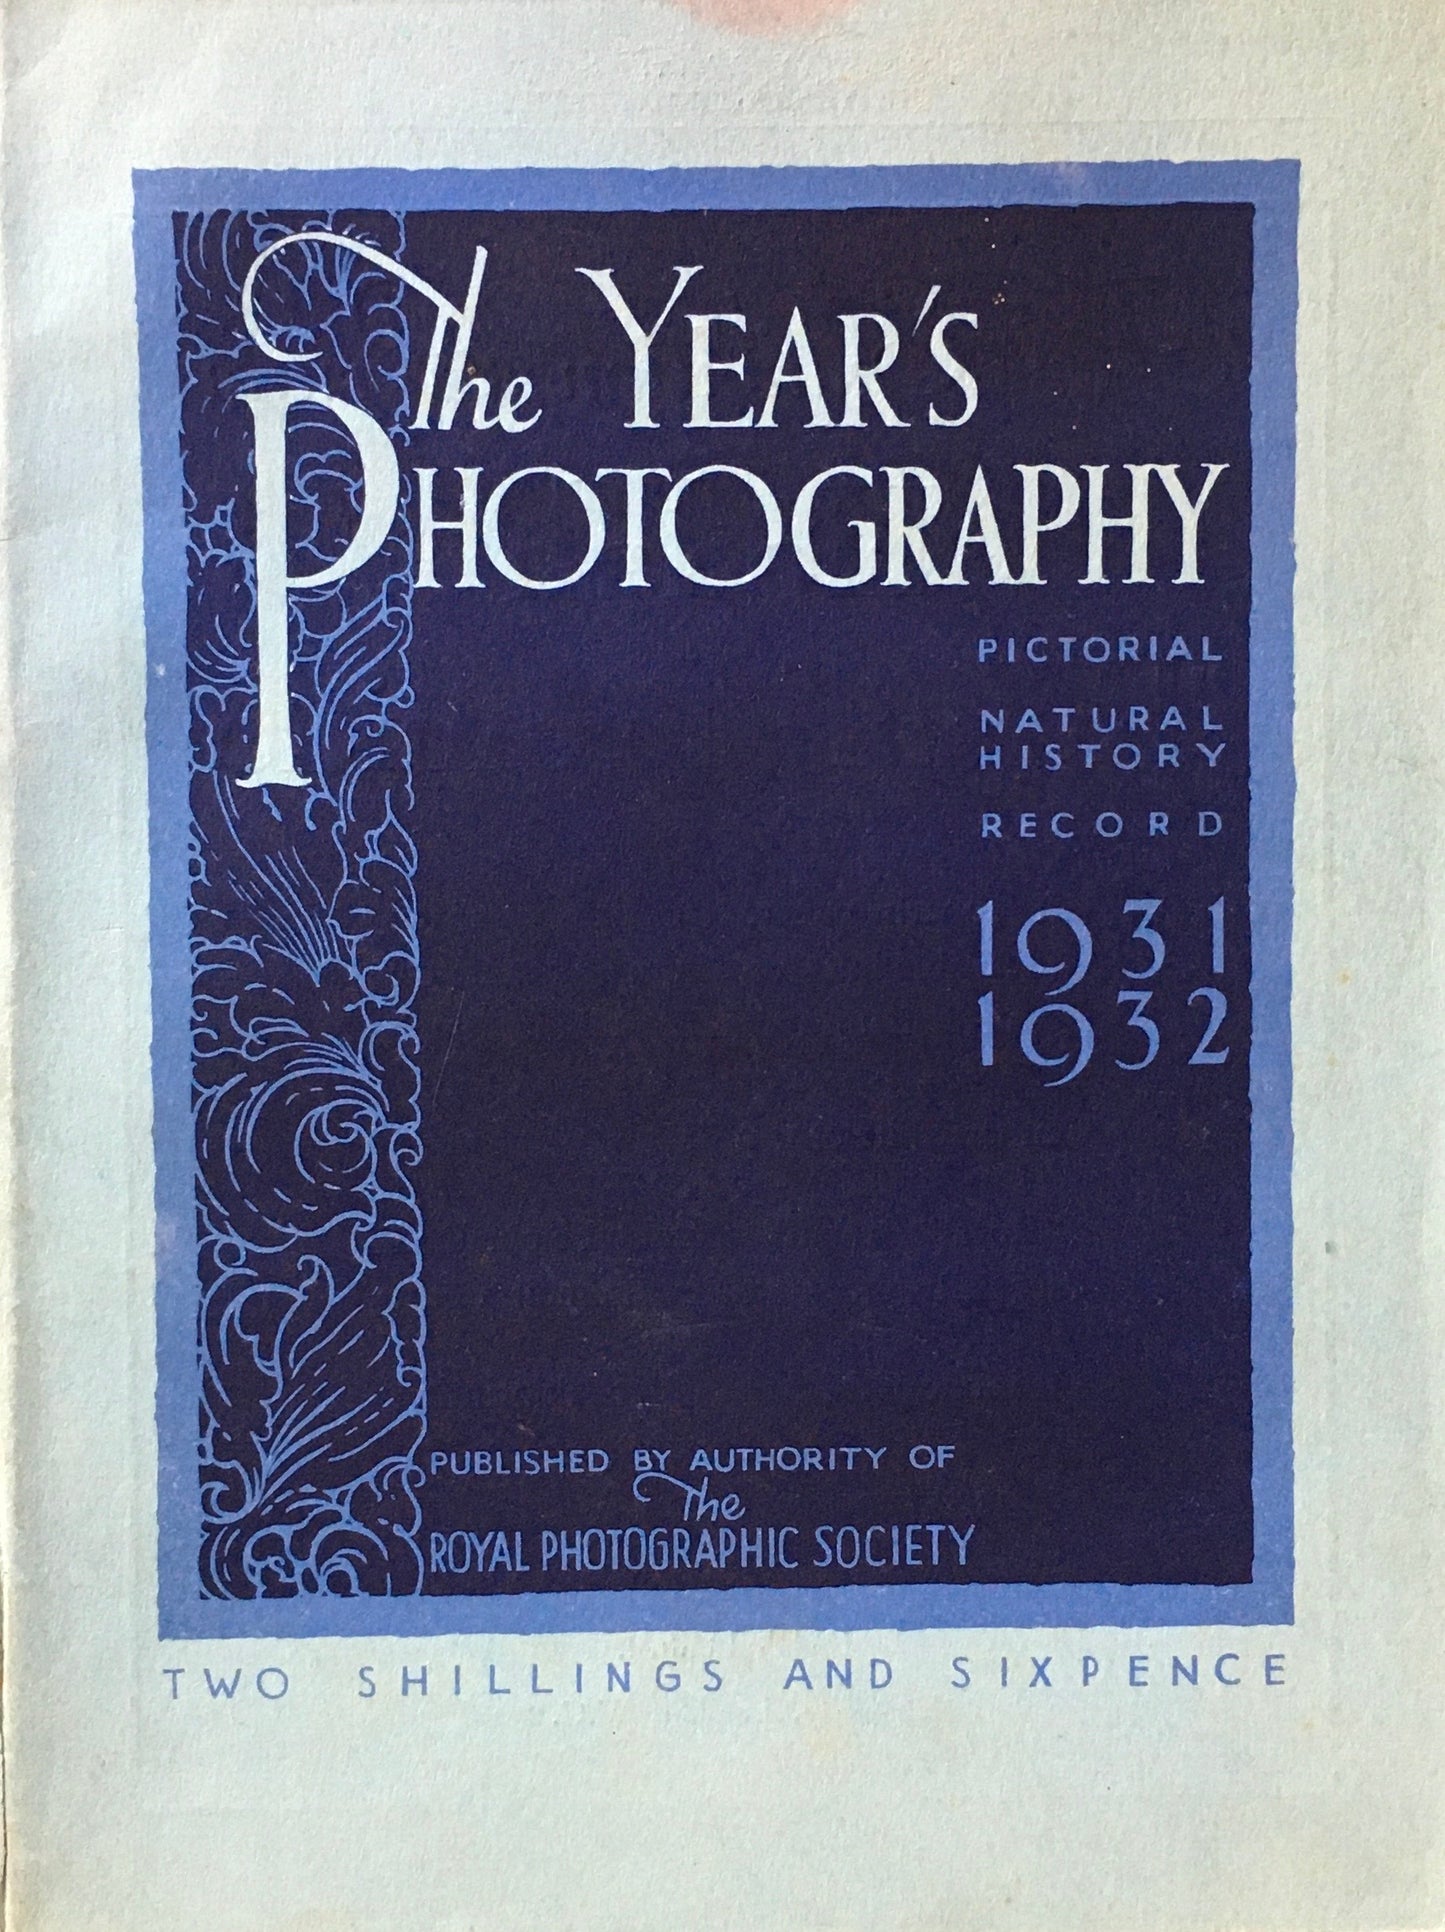 The Year's Photography　Pictorial Natural History Record　1931-1932